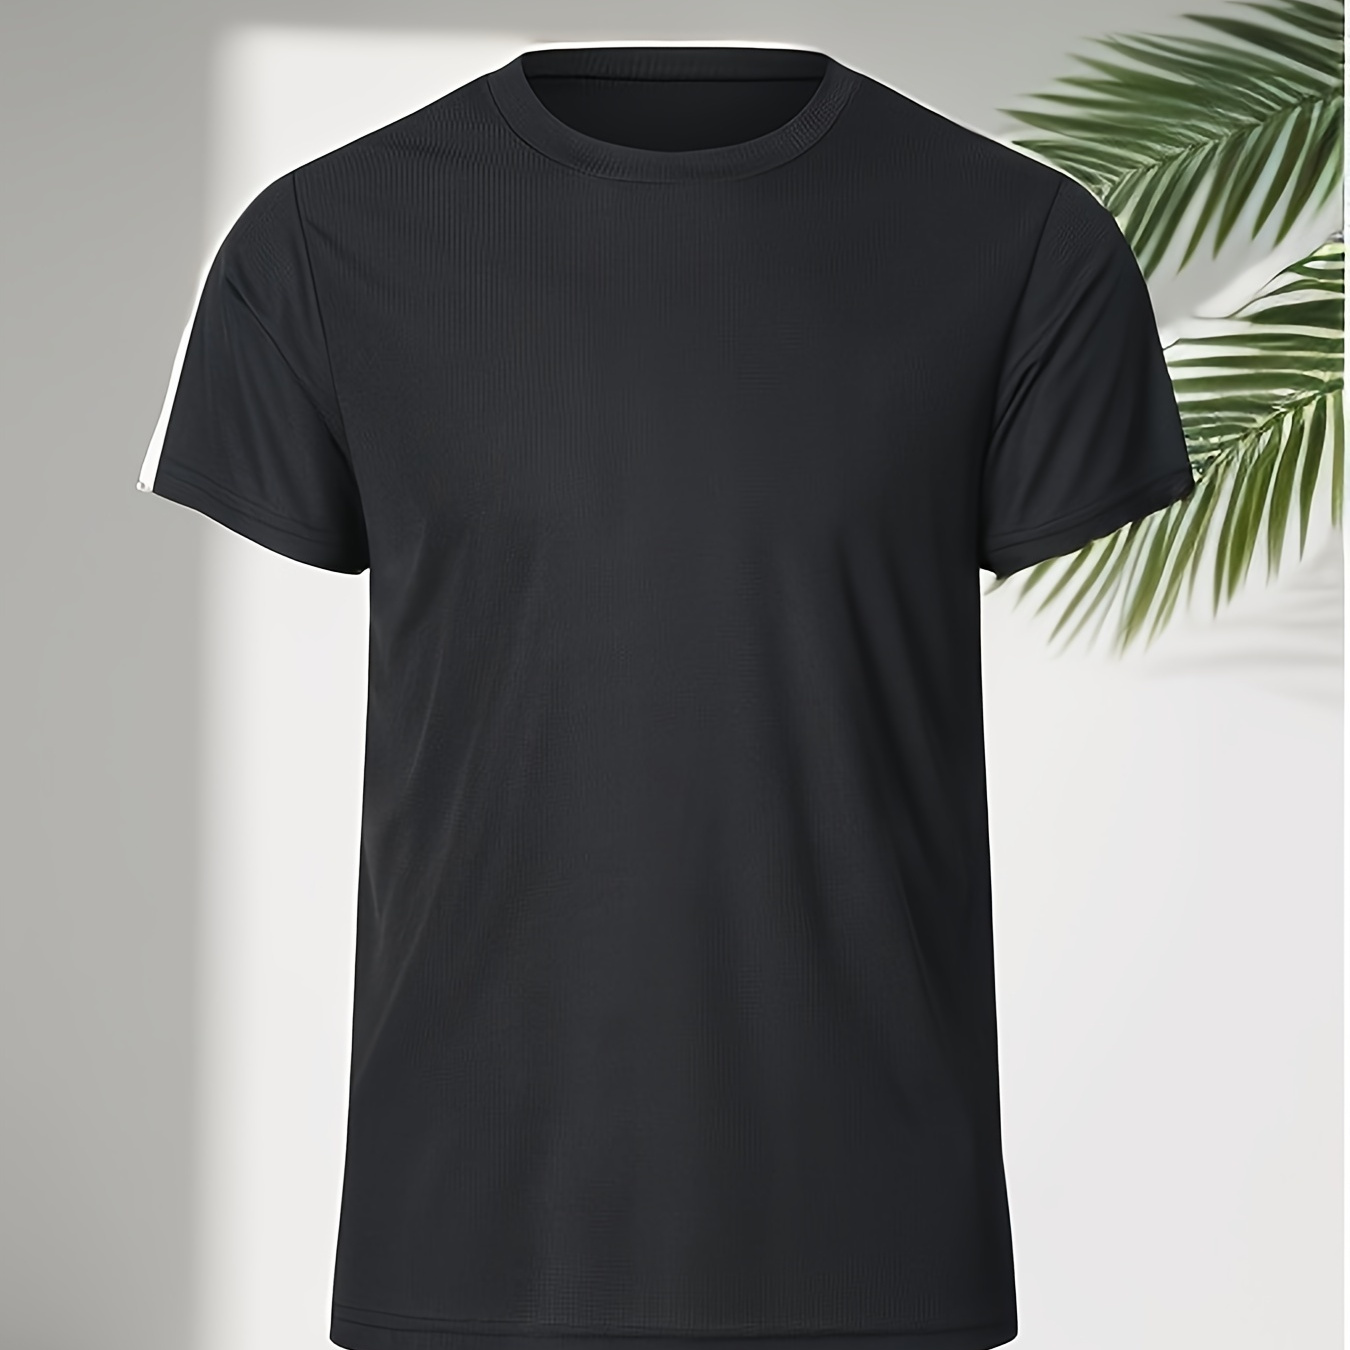 

Men's Crew Neck Fashionable Short Sleeve Sports T-shirt, Comfortable And Versatile, For Summer And Spring, Athletic Style, Comfort Fit T-shirt, As Gifts